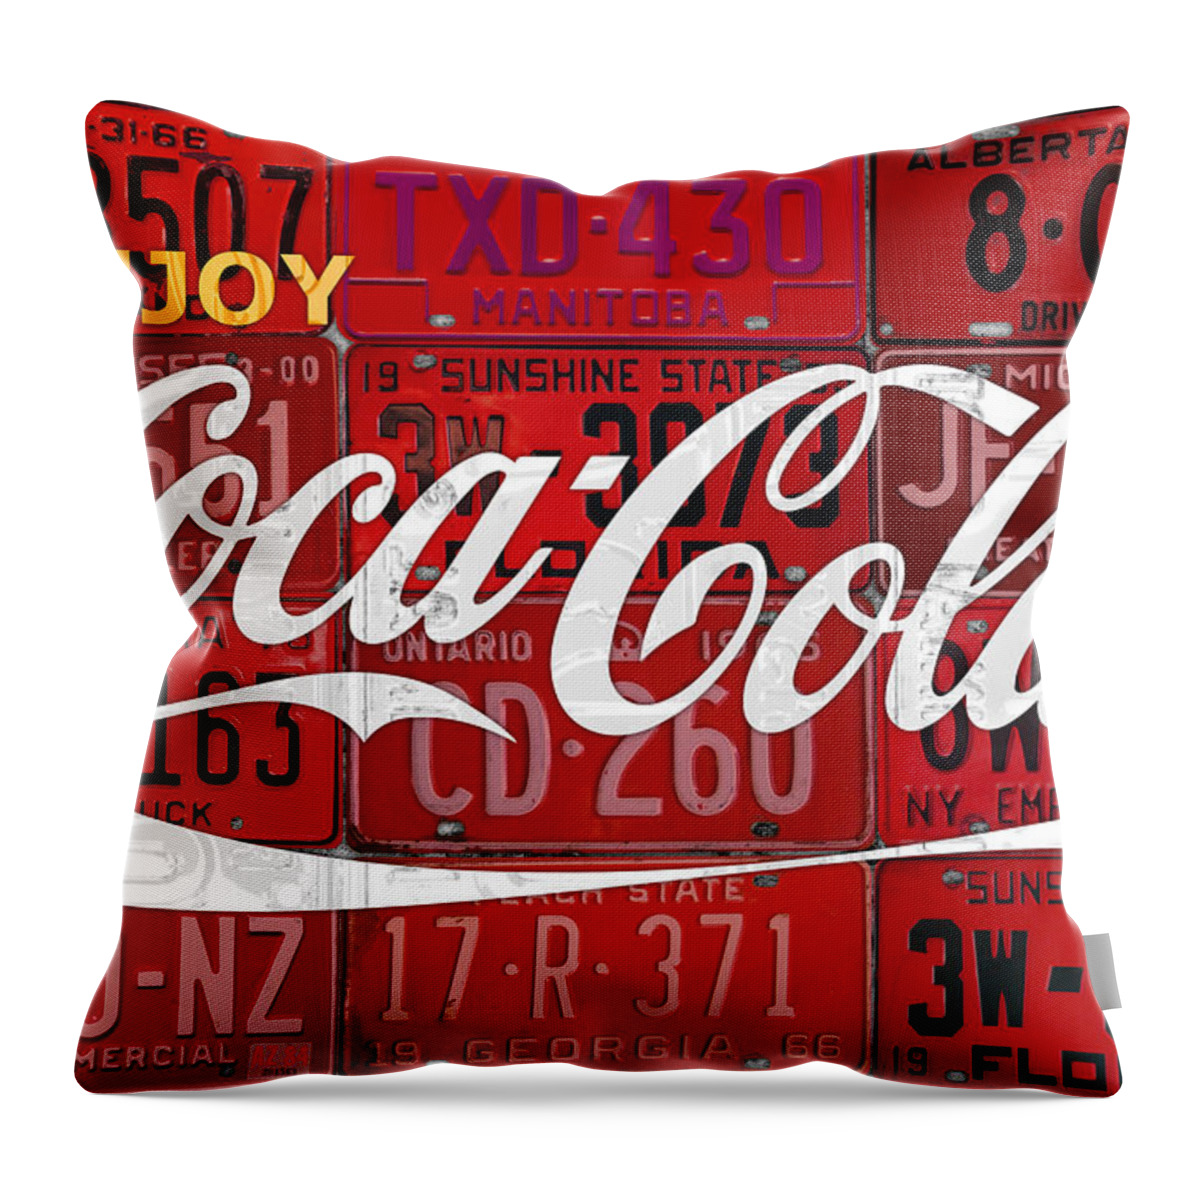 Coca Cola Throw Pillow featuring the mixed media Coca Cola Enjoy Soft Drink Soda Pop Beverage Vintage Logo Recycled License Plate Art by Design Turnpike